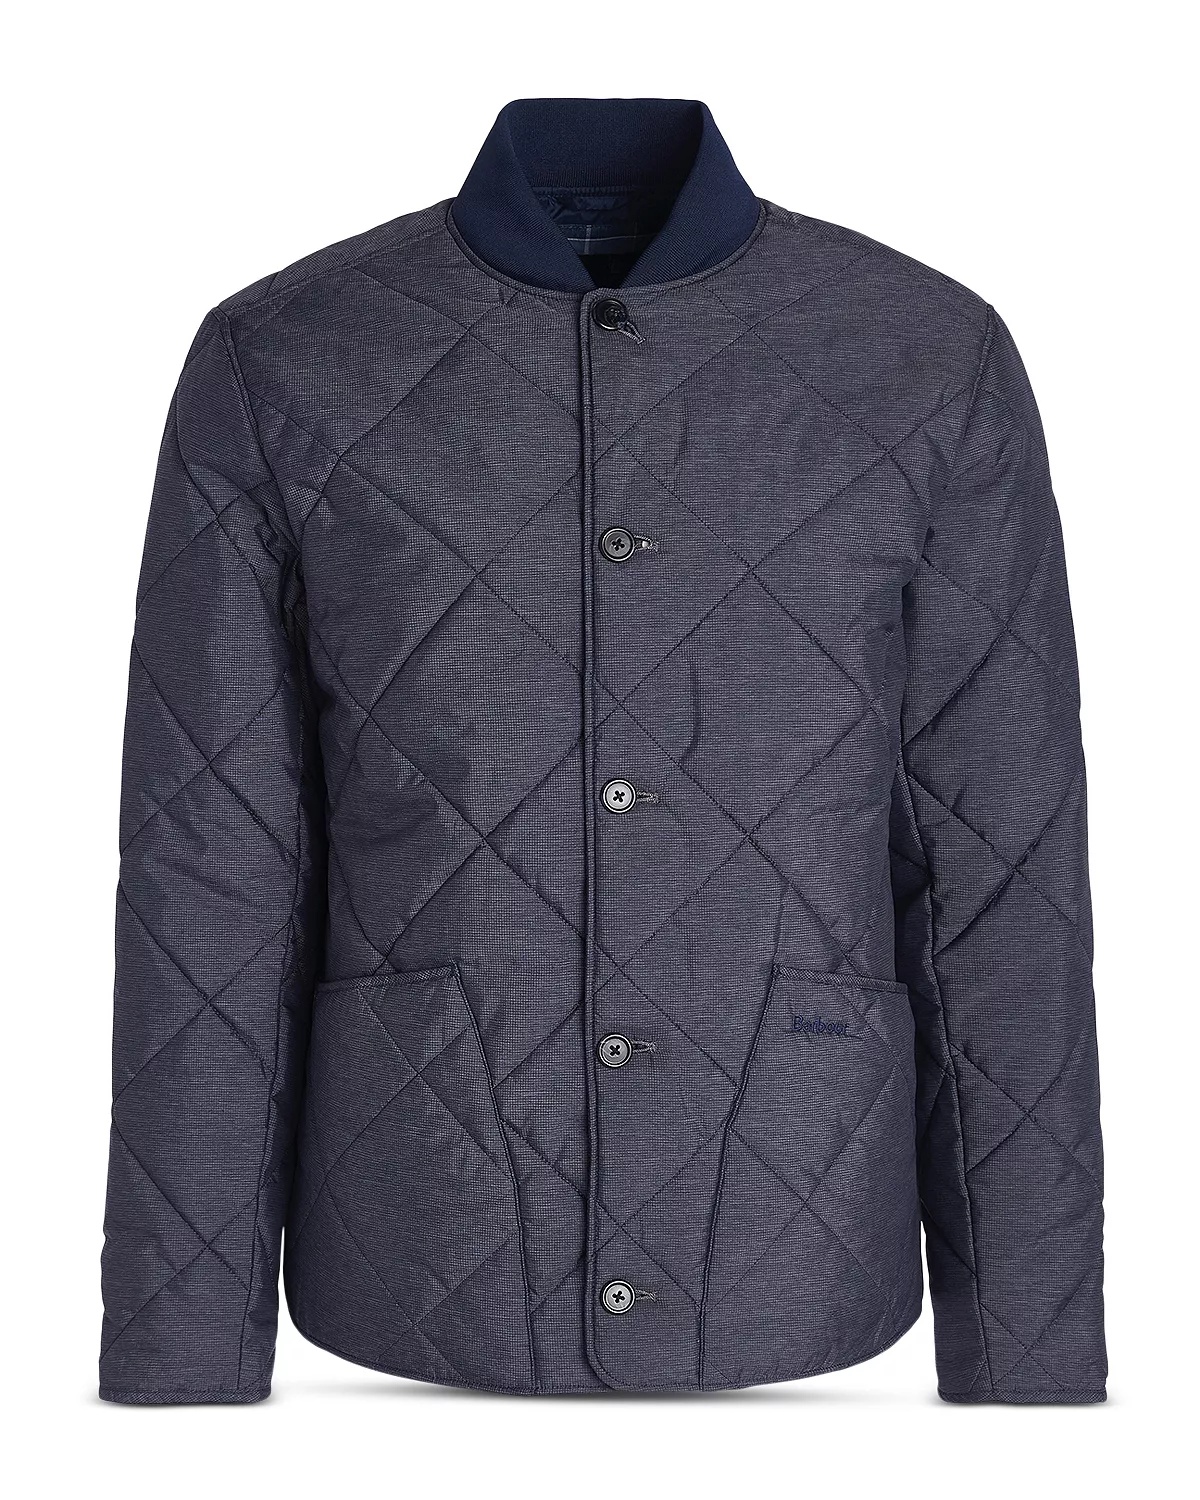 Tarn Liddesdale Quilted Jacket - 7